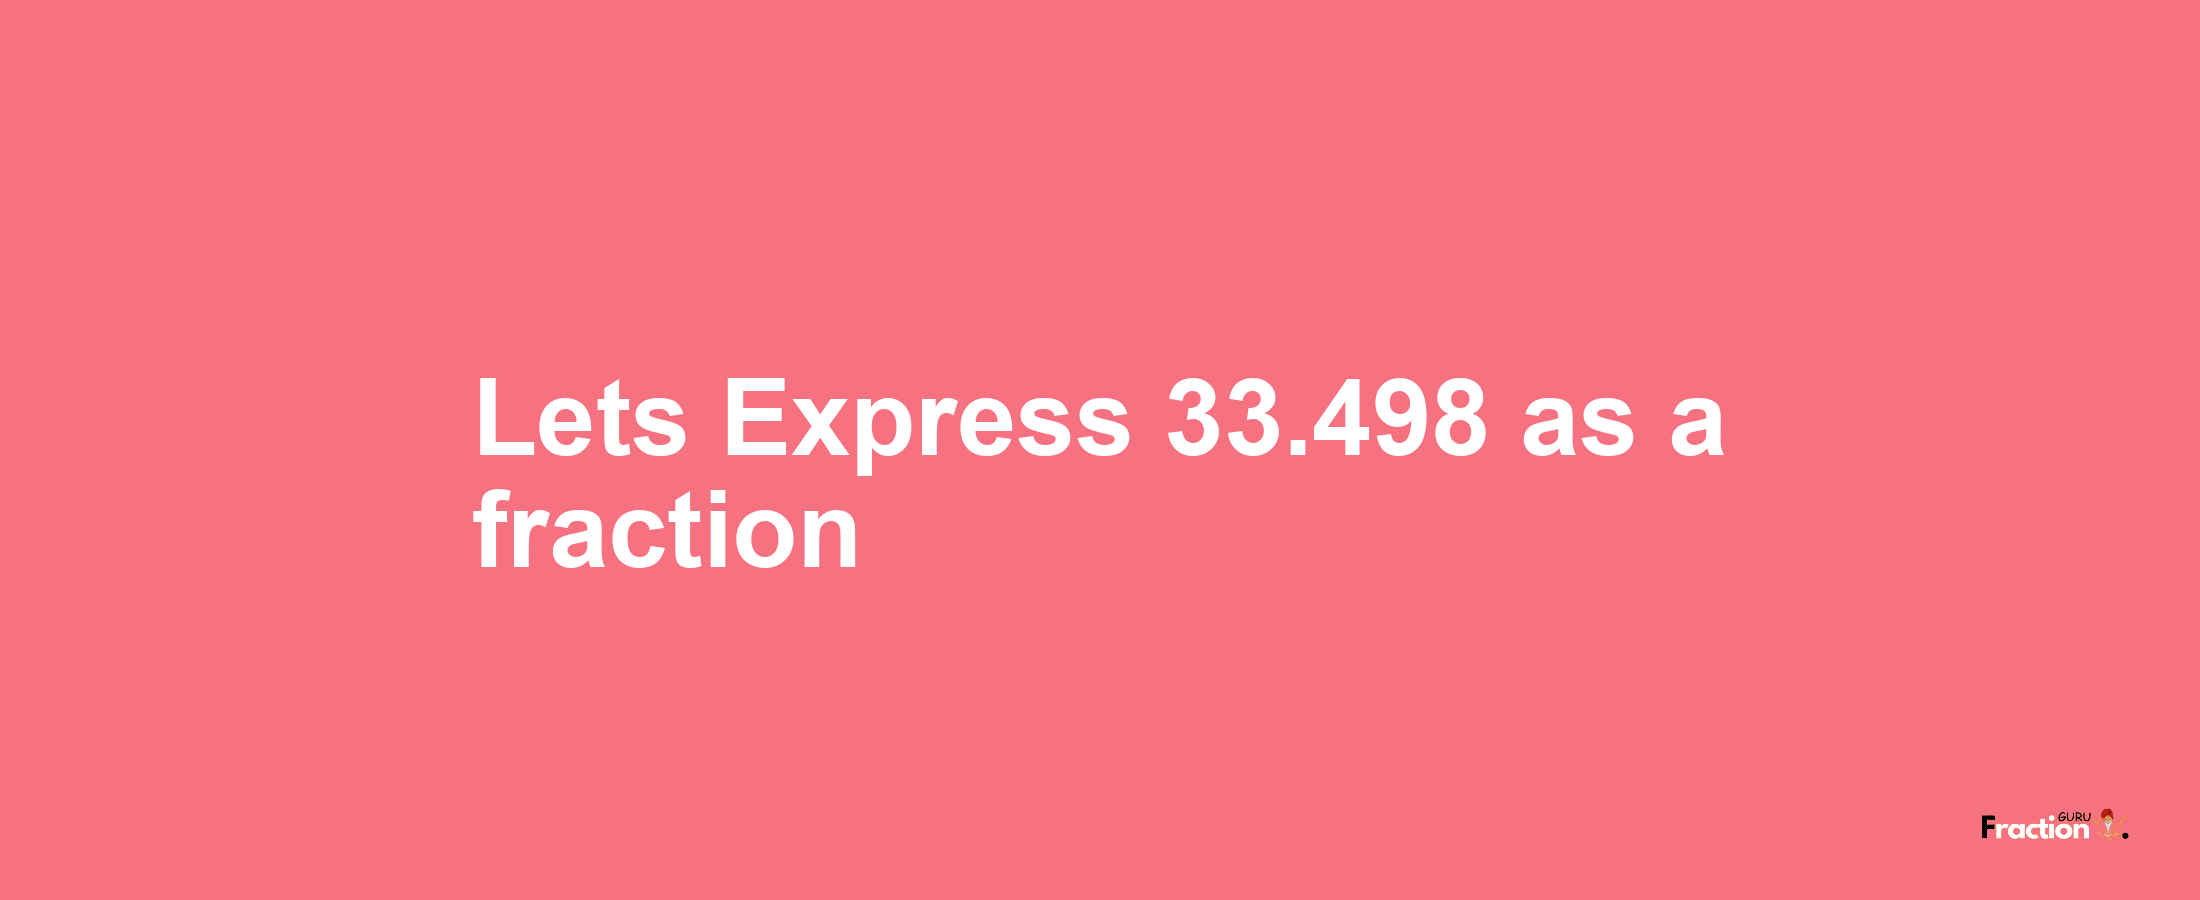 Lets Express 33.498 as afraction